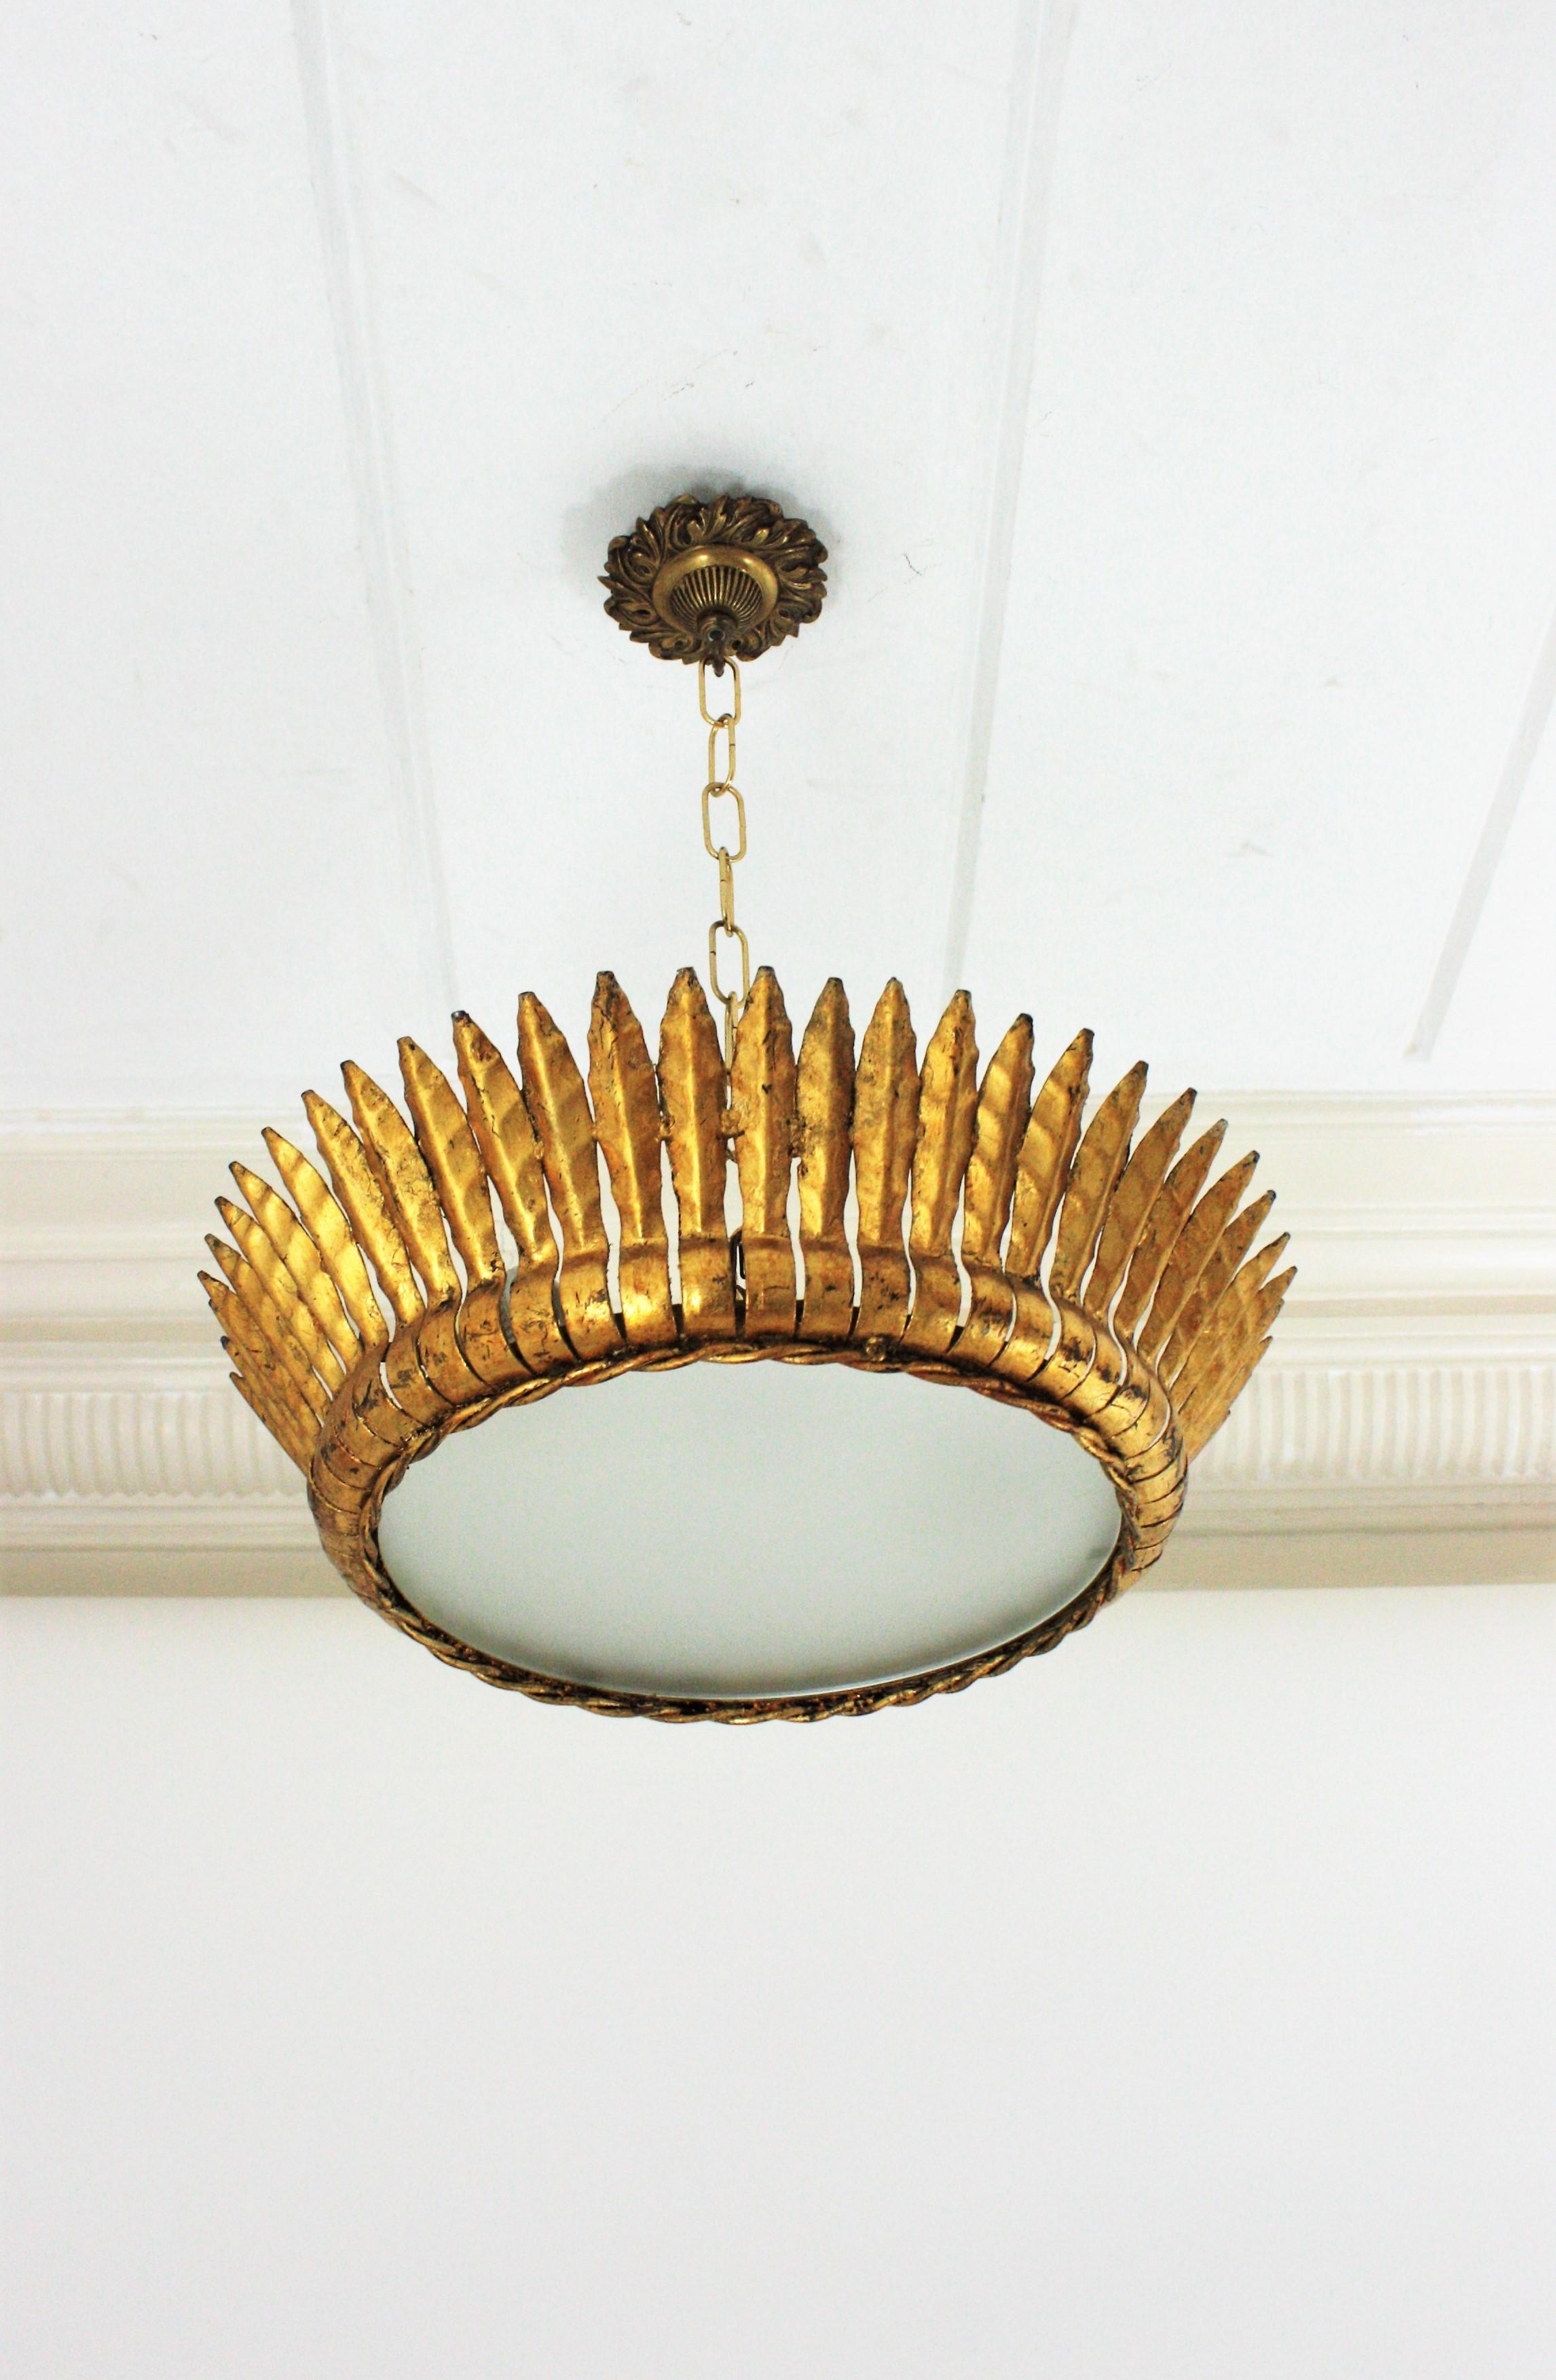 Mid-Century Modern gilt iron crown sunburst flushmount or pendant with leaf motifs surrounding a central frosted glass diffuser, Spain, 1950s.
Handcrafted in hammered iron with gold leaf finishing.
It has a twisted iron rope surrounding the glass